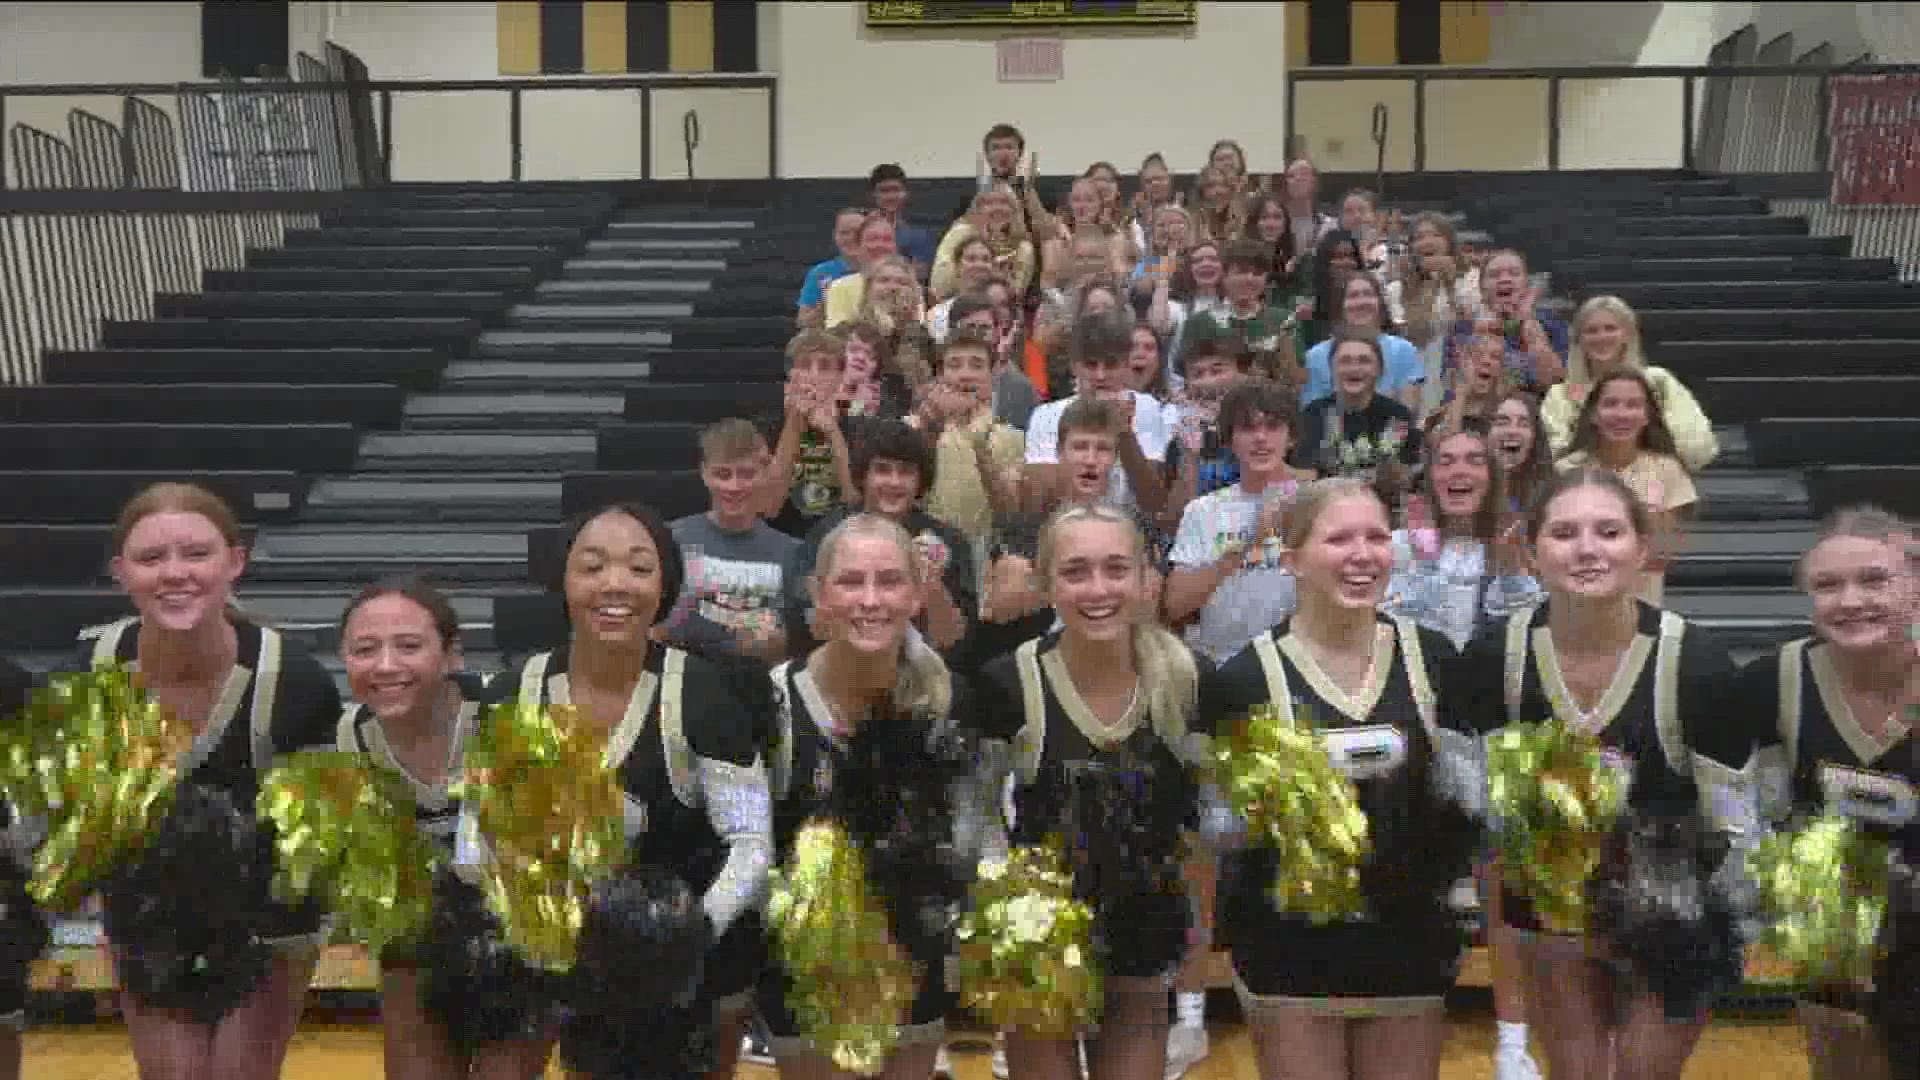 Perrysburg High School goes back to class on Tuesday. The 'link crew' will pair upper classmen with incoming freshmen to familiarize them with the new school.